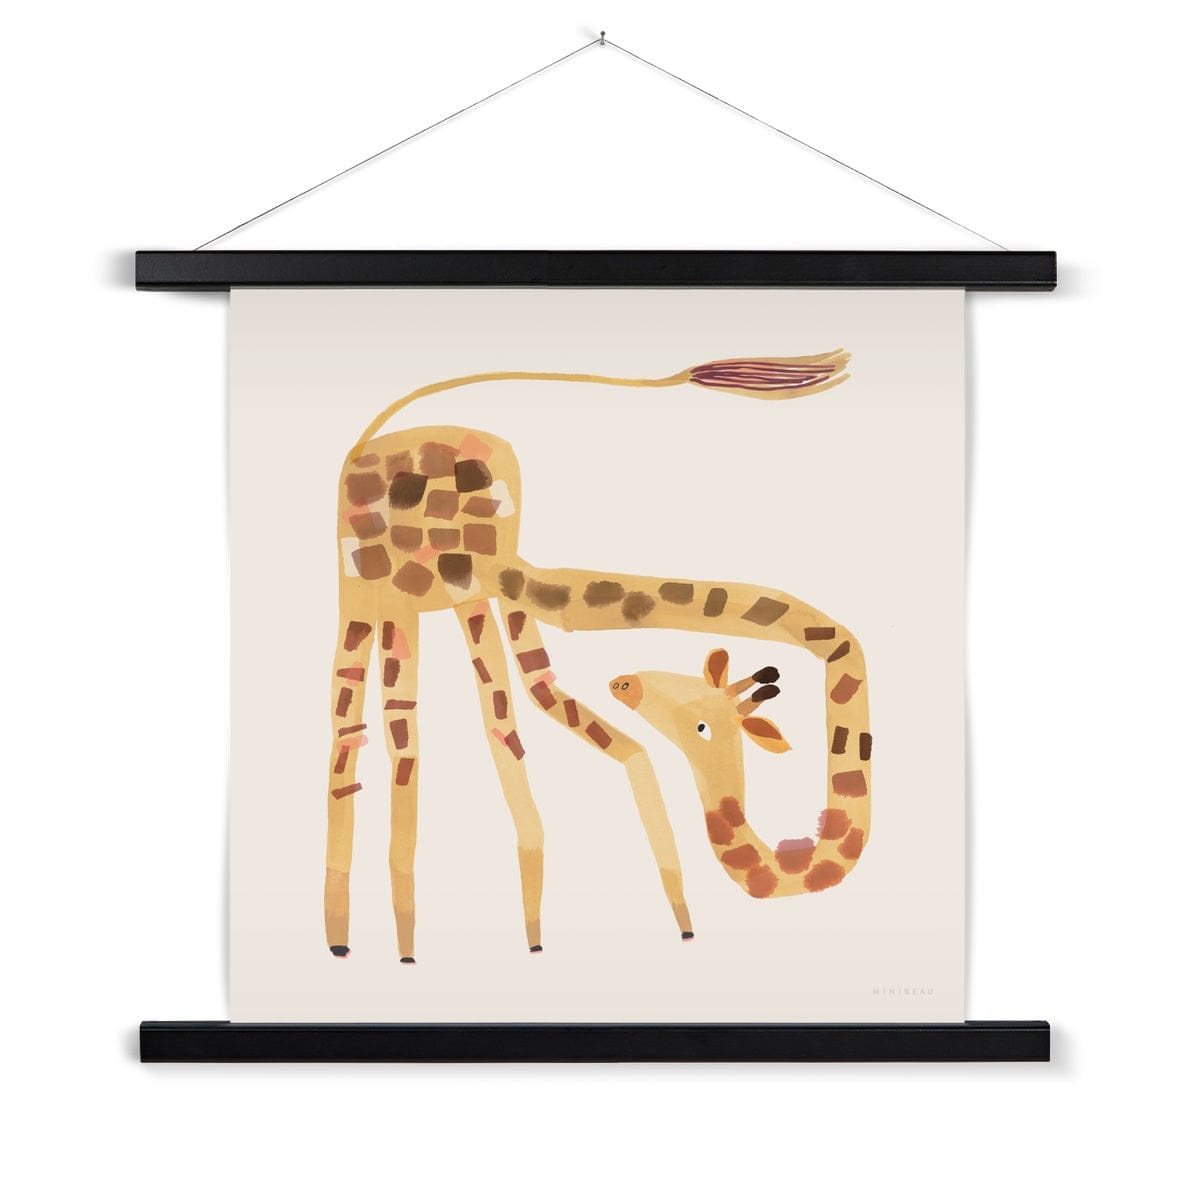 Art print in a black hanger. Our square Giraffe art print shows a cartoon giraffe with it's tail in the air and it's bending neck looking round its shoulders on a neutral background.